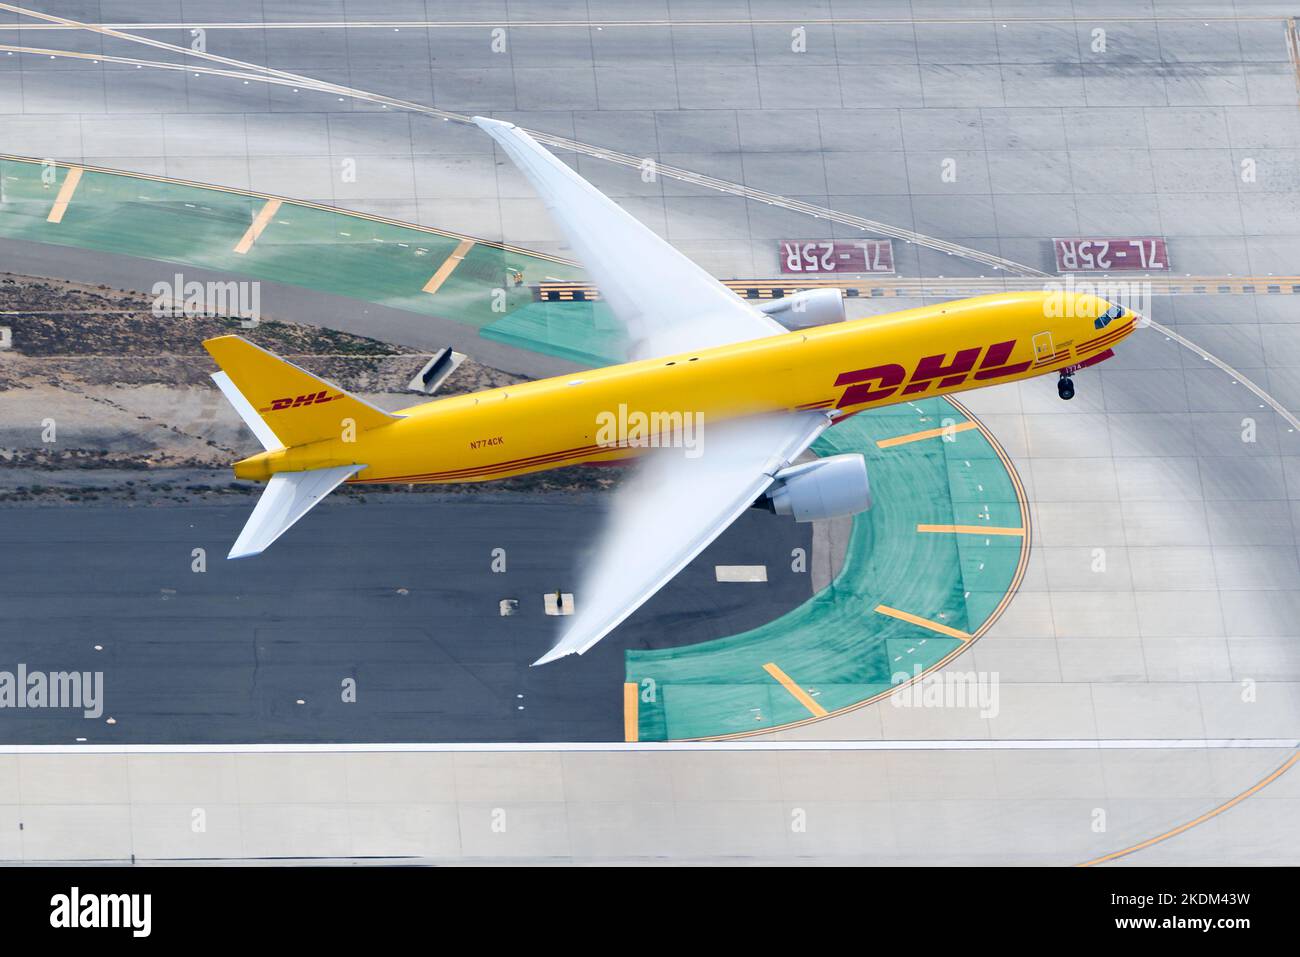 DHL Cargo aircraft Boeing 777 taking off. Transport of freighter on DHL Kalitta Air airplane 777F. Plane take off with condensation above wings. Stock Photo